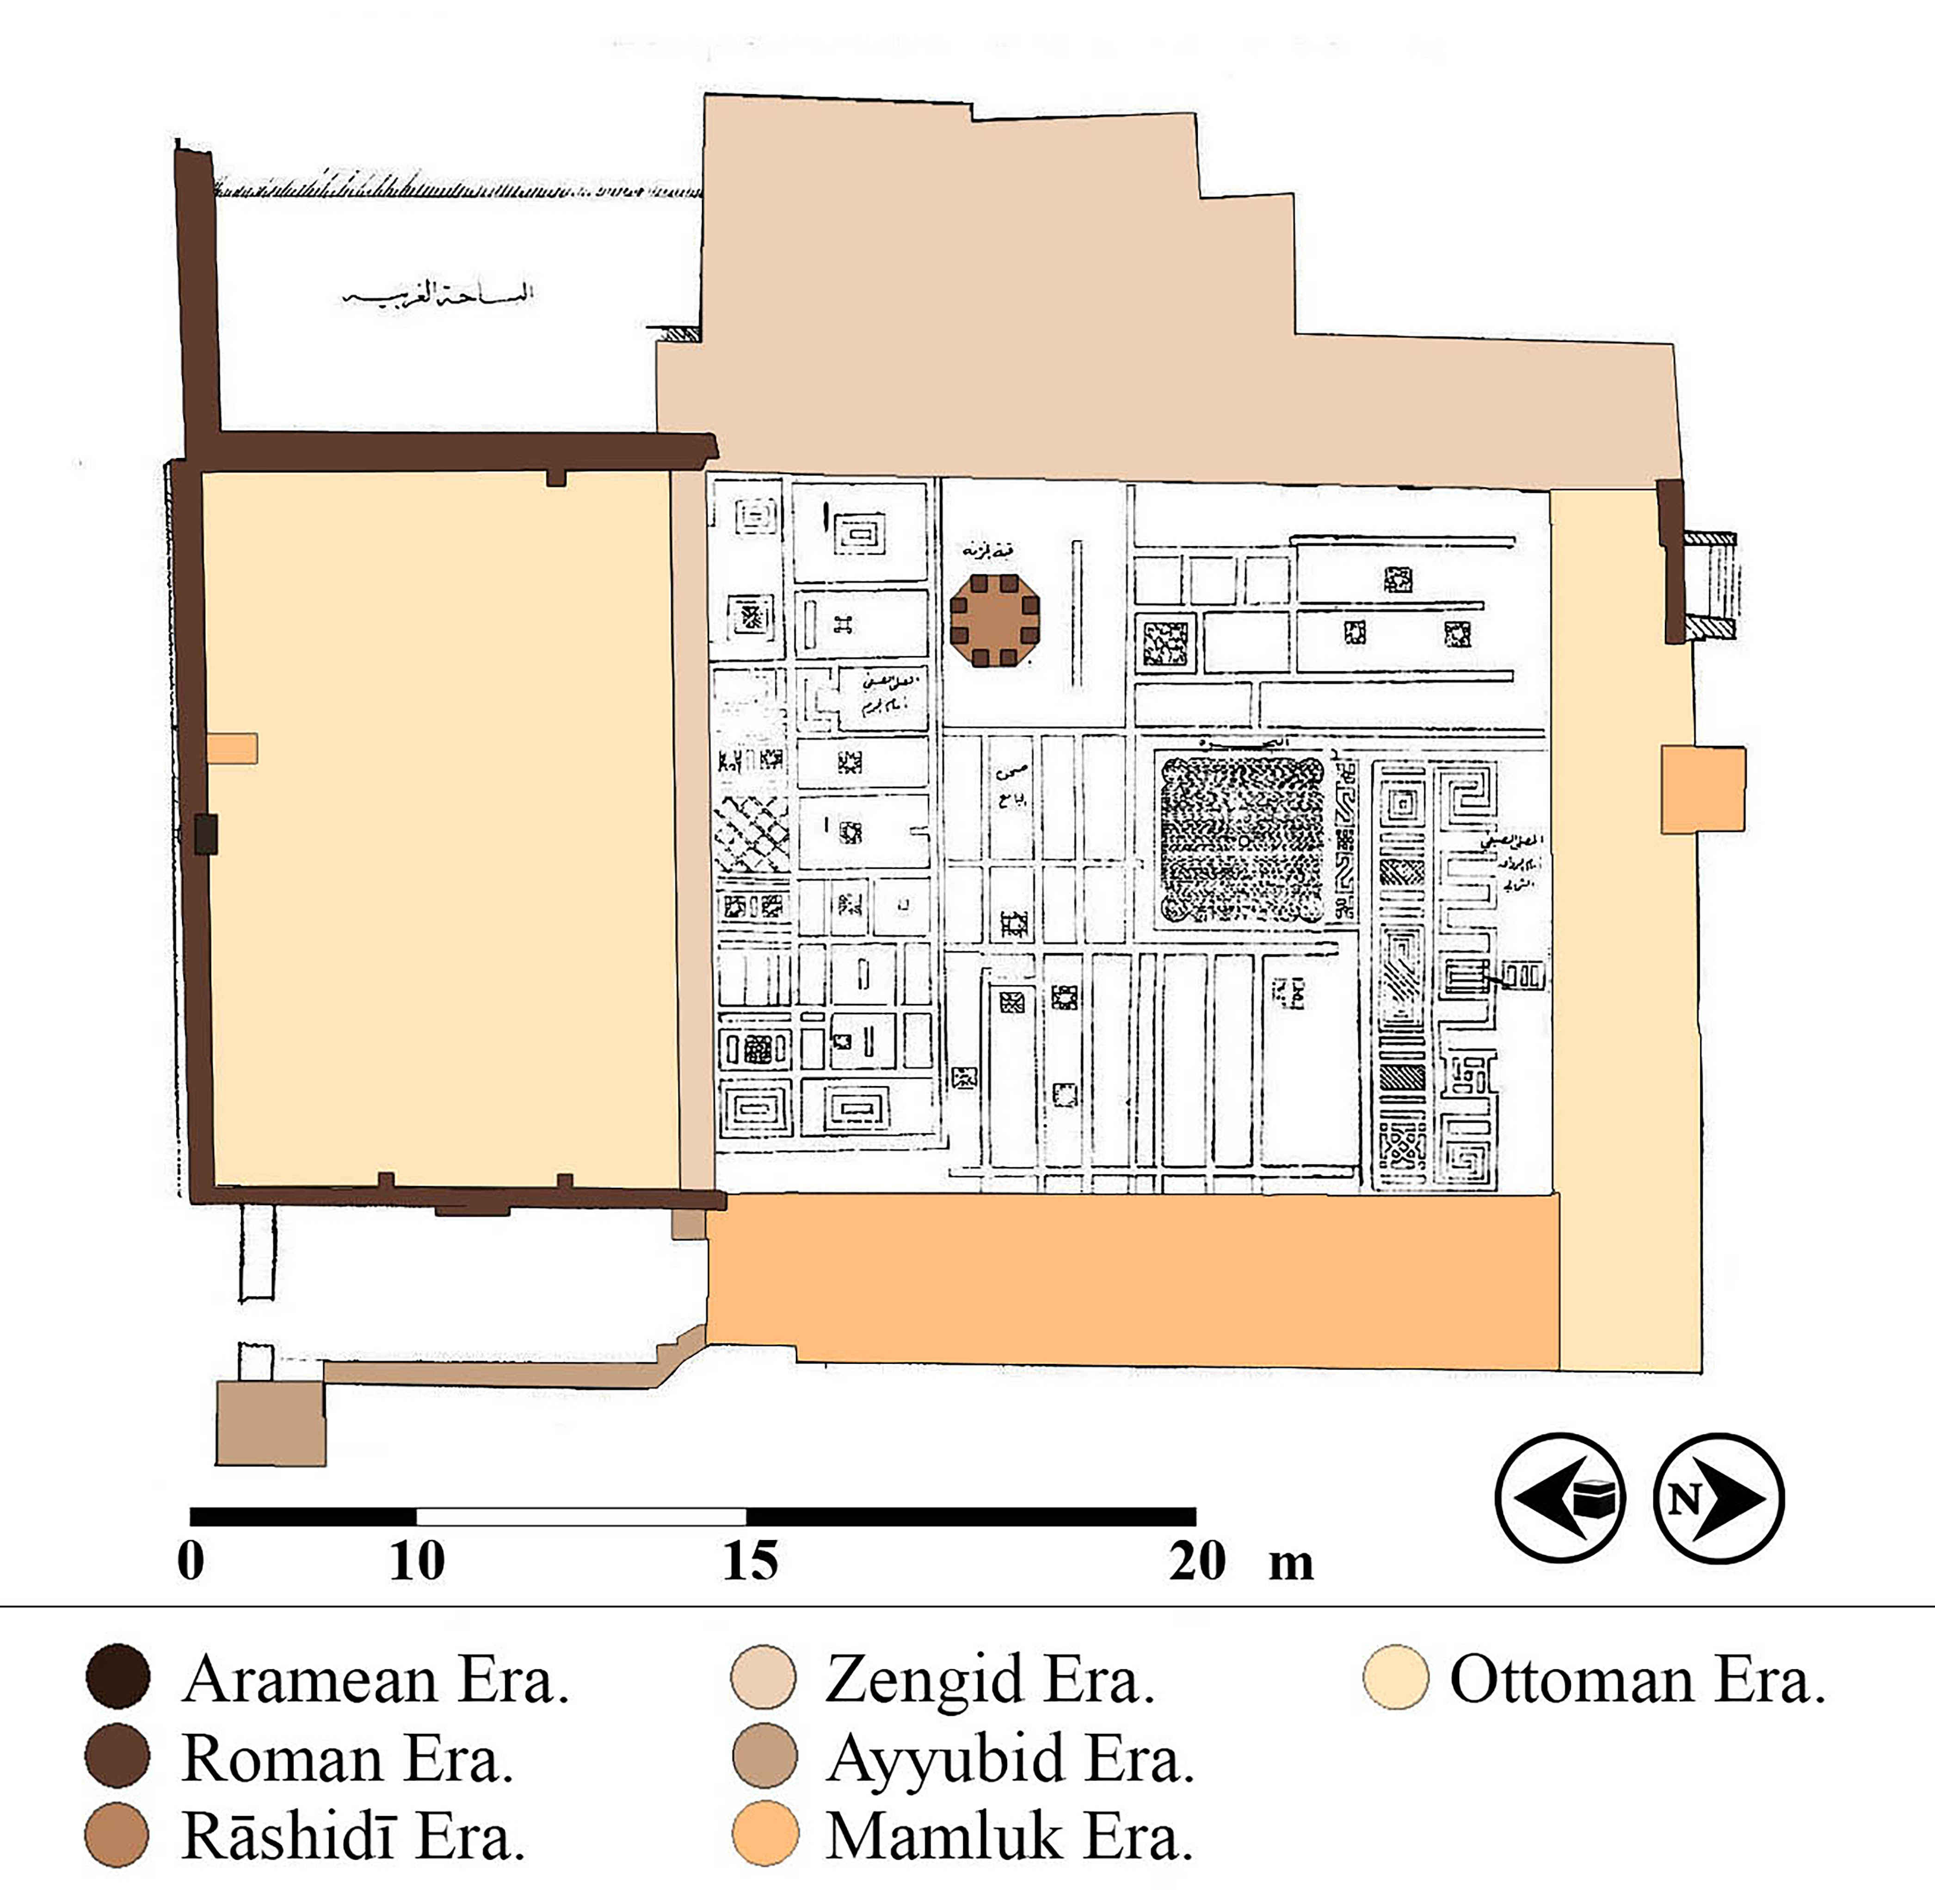 Historical plan of the Upper Mosque in Hama [7].